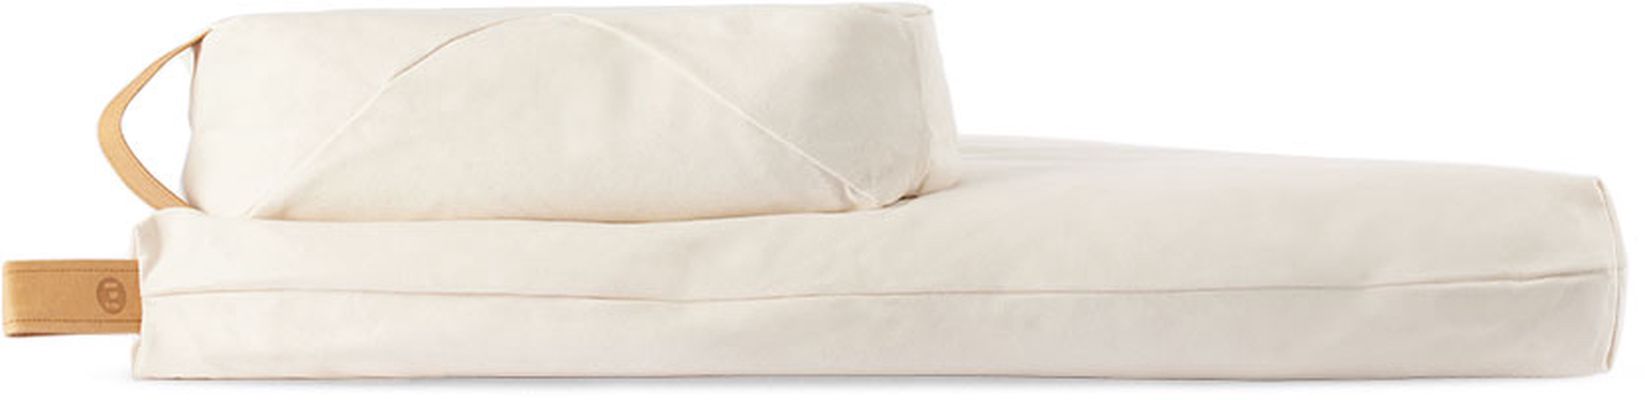 project full Off-White Natural Canvas Meditation Cushion Set